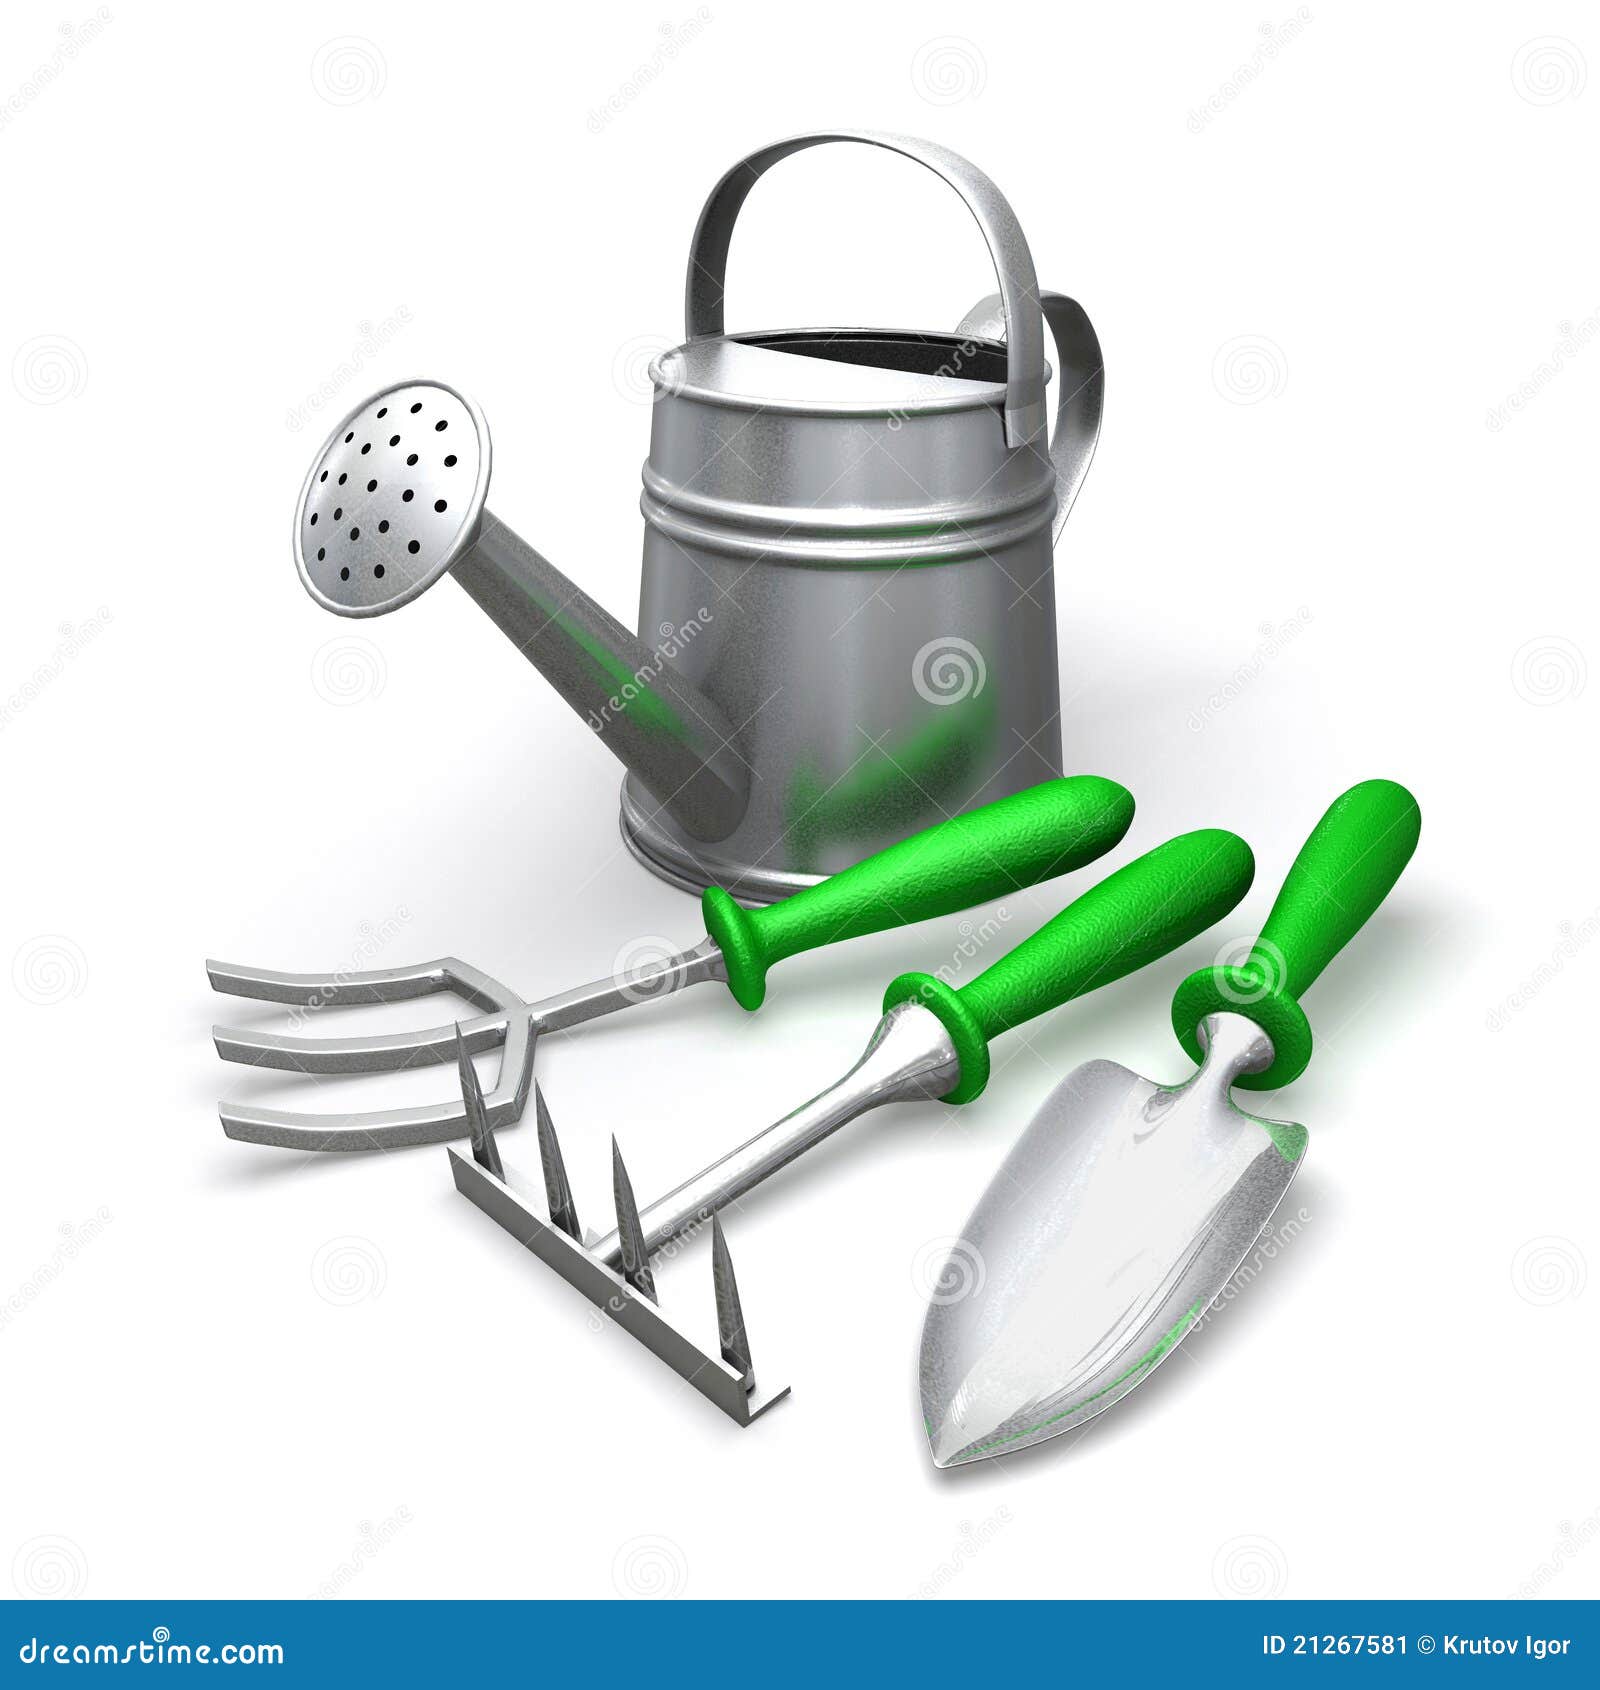 clipart pictures of gardening tools - photo #25